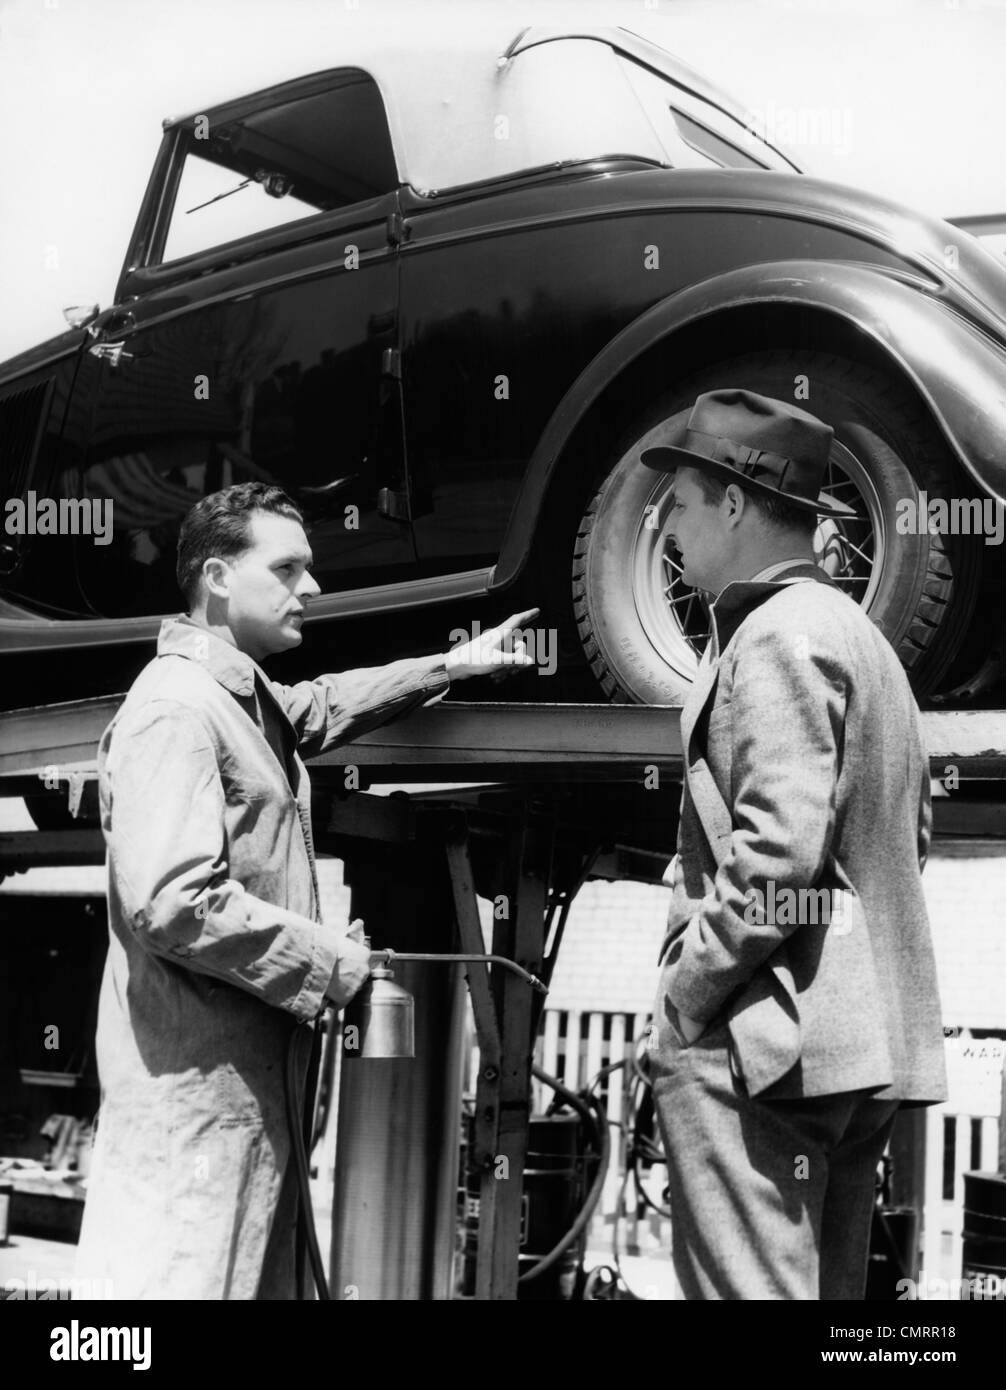 1930s SERVICE STATION ATTENDANT IN COVERALLS HOLDING OIL CAN POINTING AT PROBLEM CONVERTIBLE ON LIFT TALKING TO OWNER Stock Photo